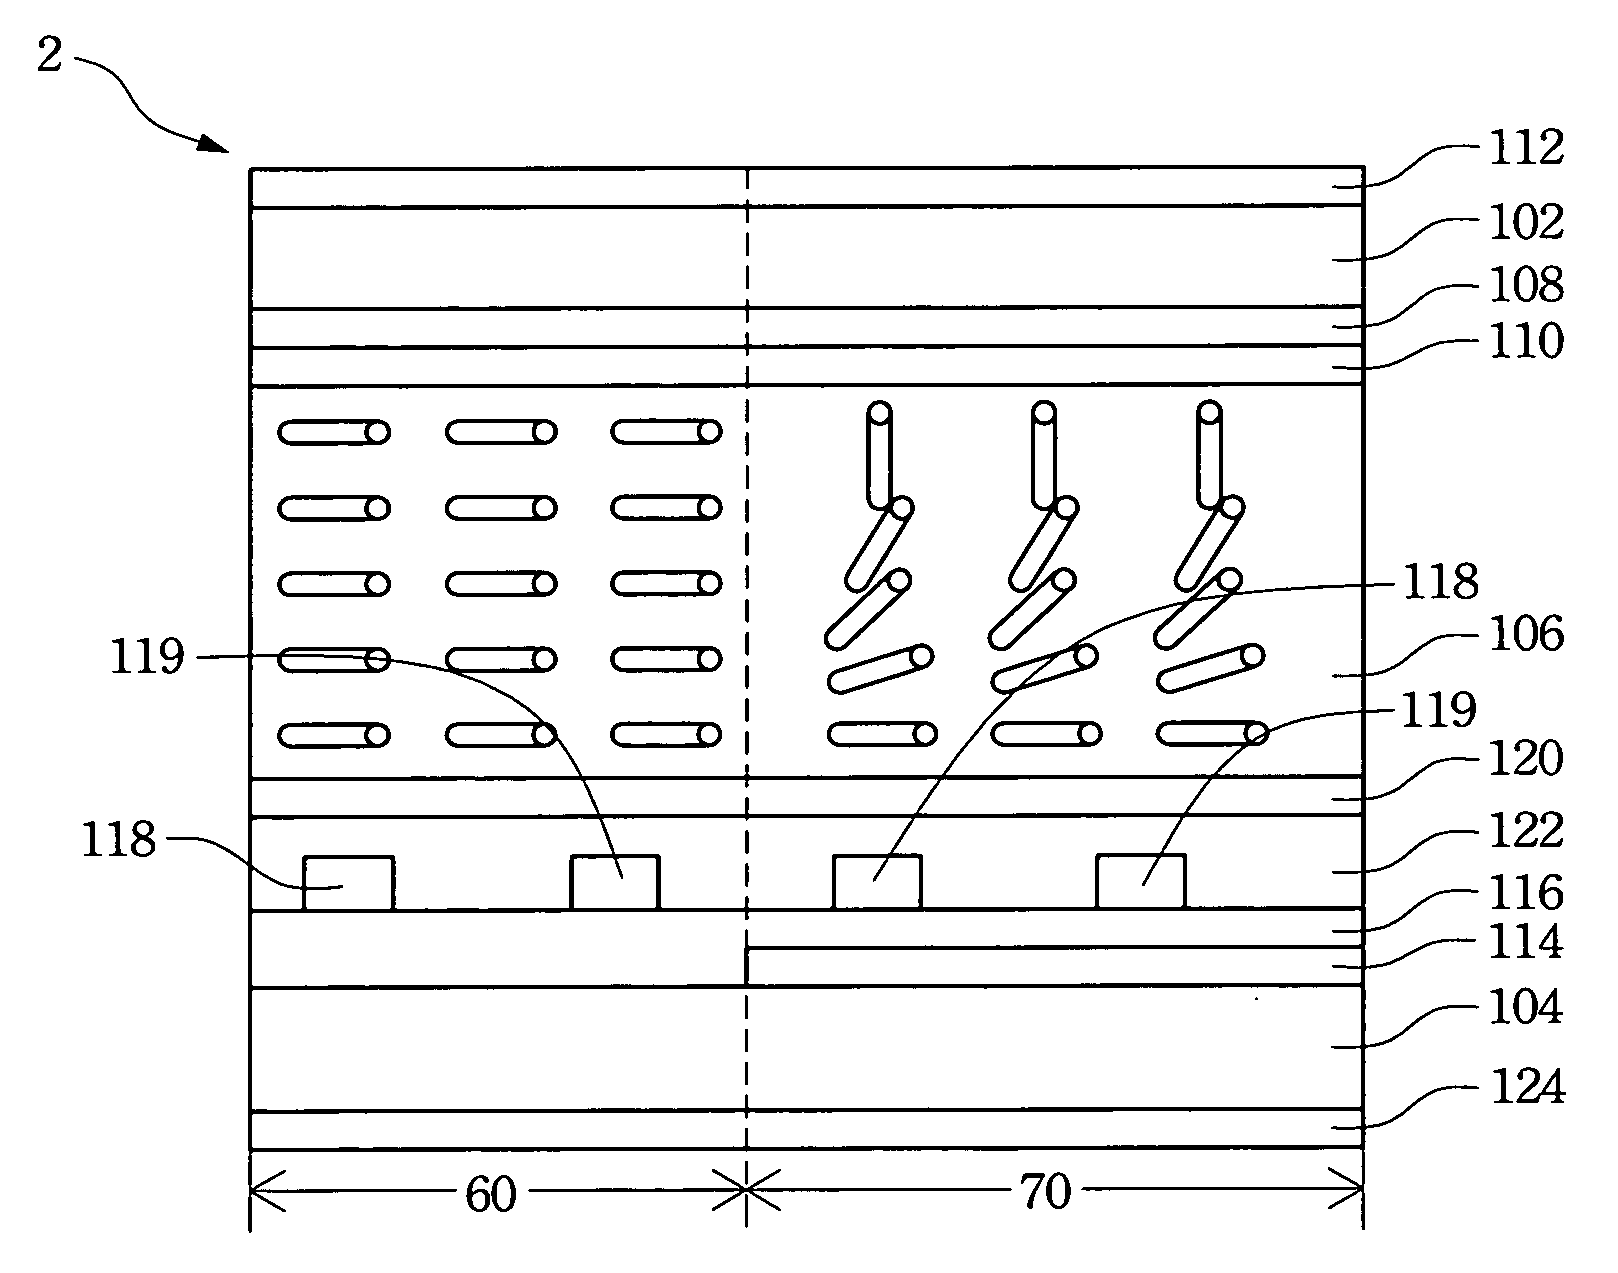 Liquid crystal display and method for manufacturing the same